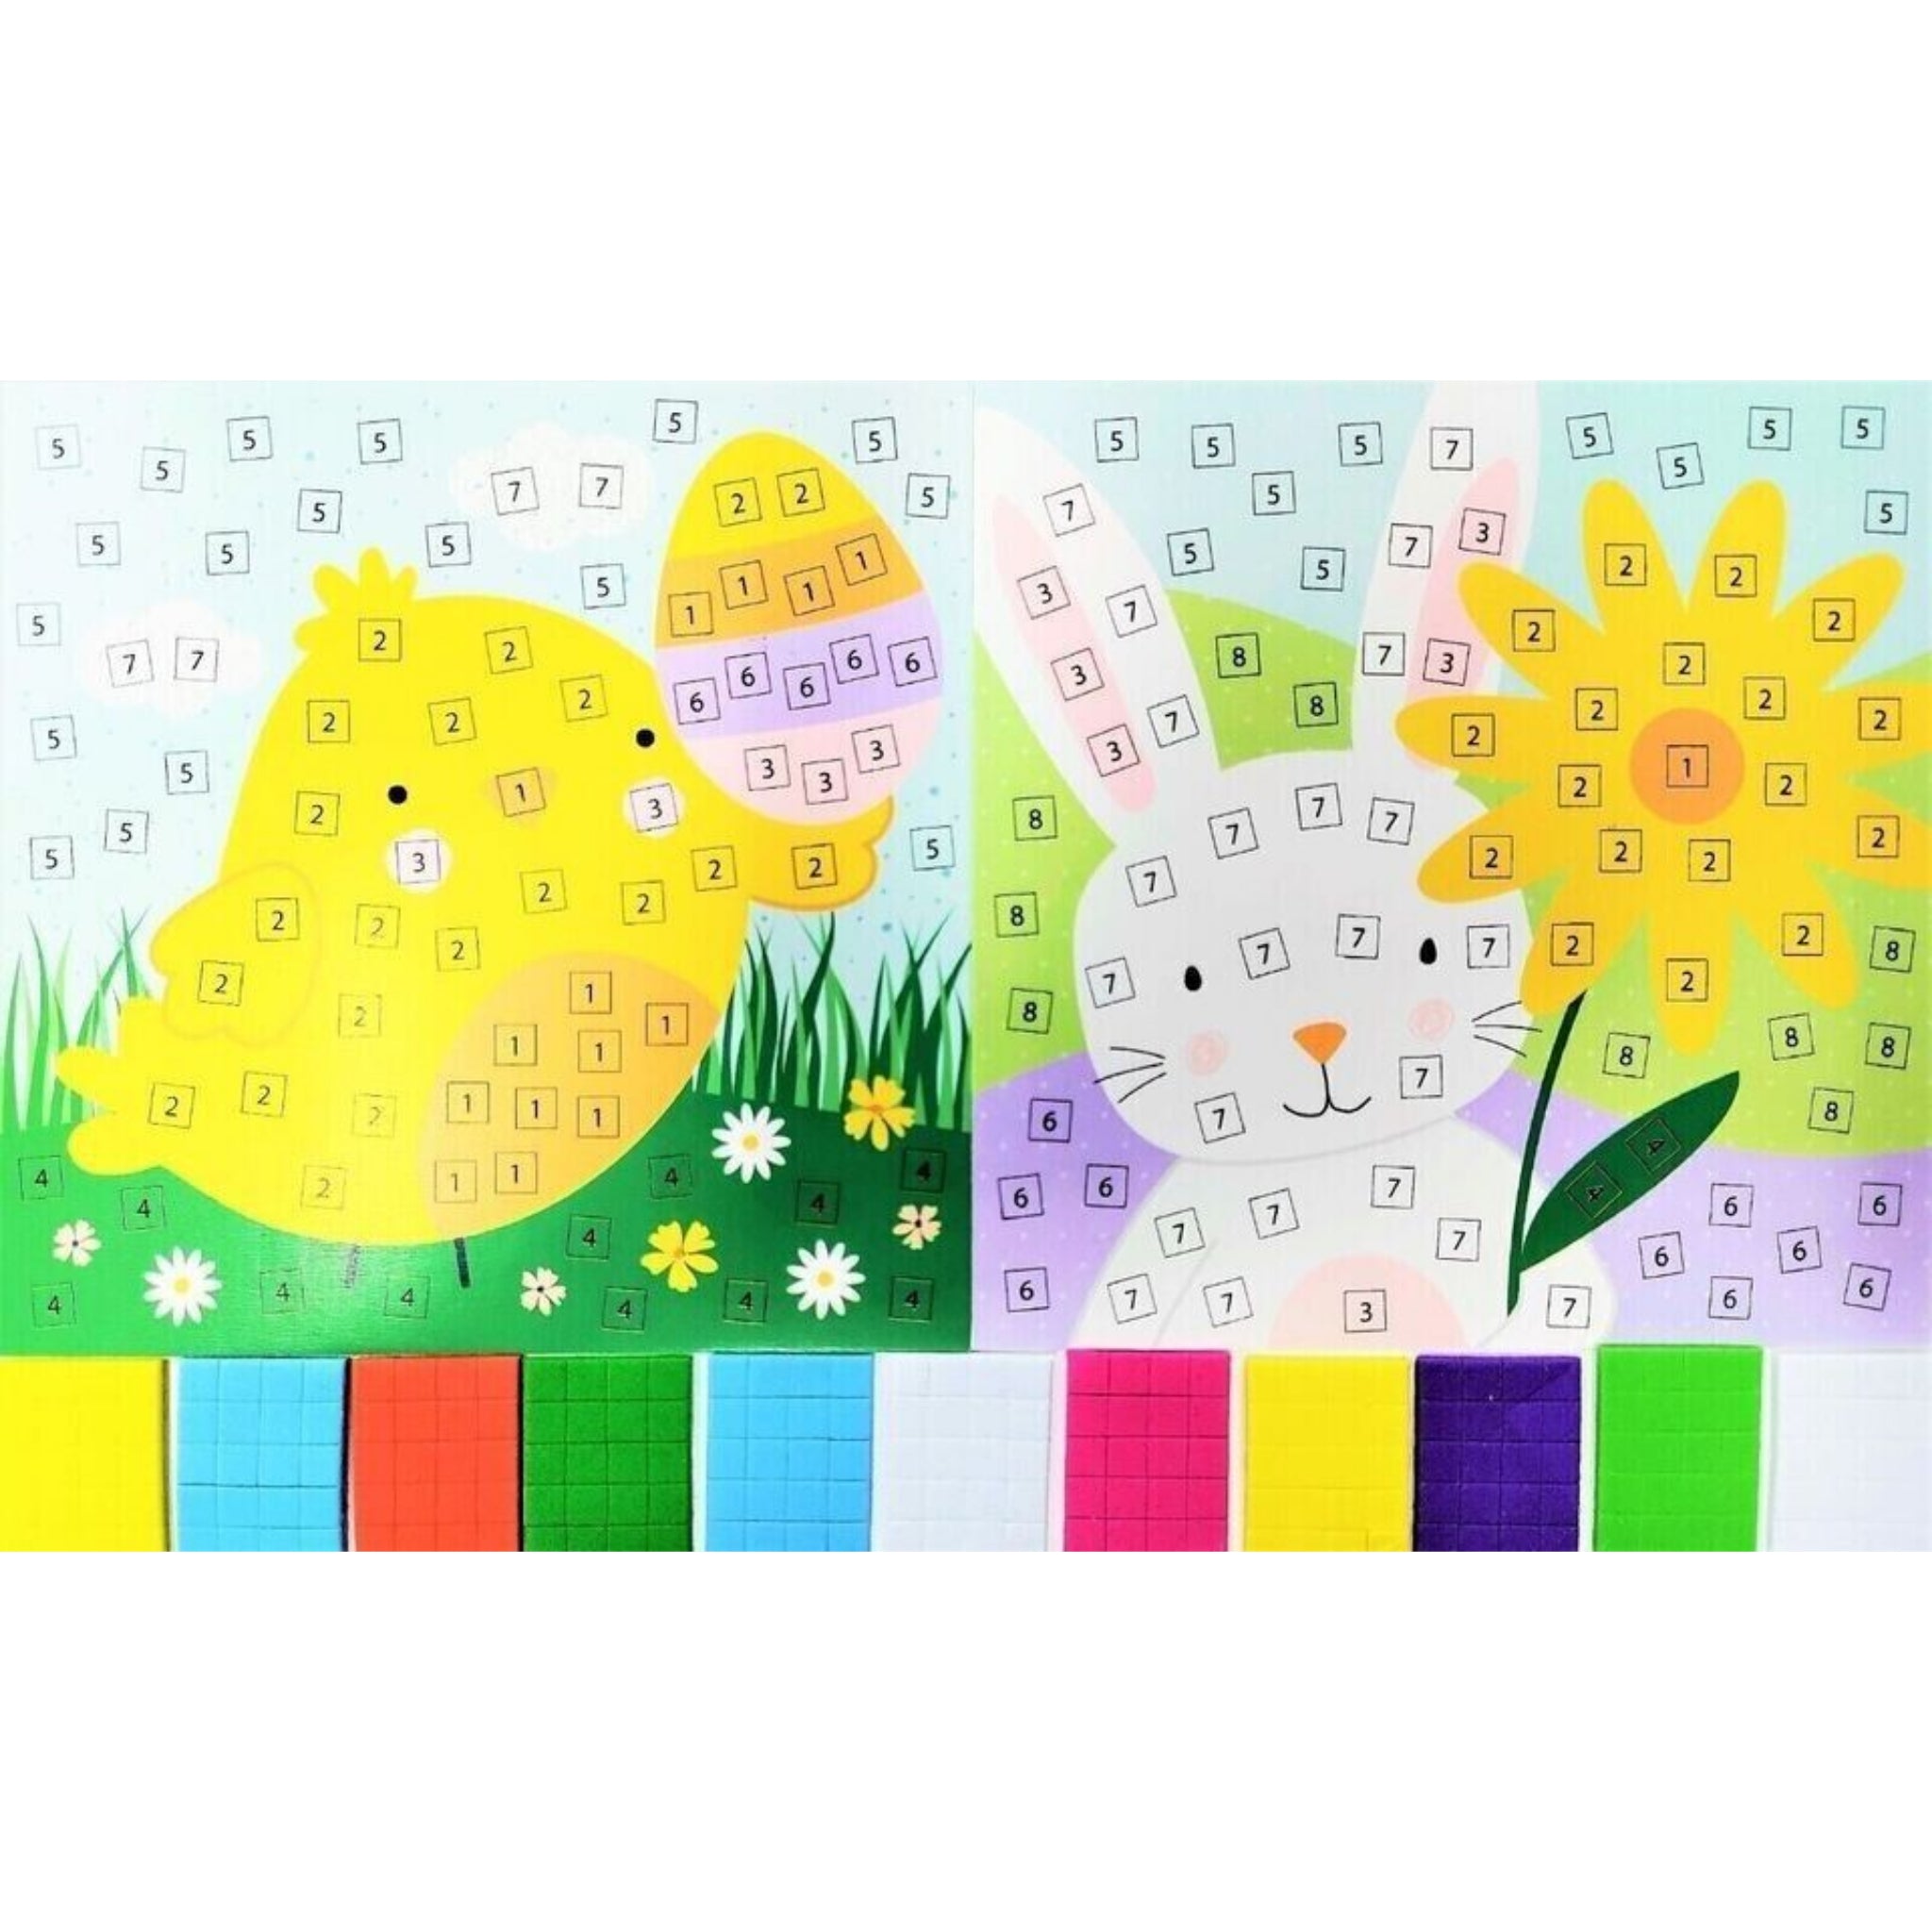 Beclen Harp Make your Own 2 Easter Mosaics - Decorate Your Own Easter Bunny Chick Craft Kit